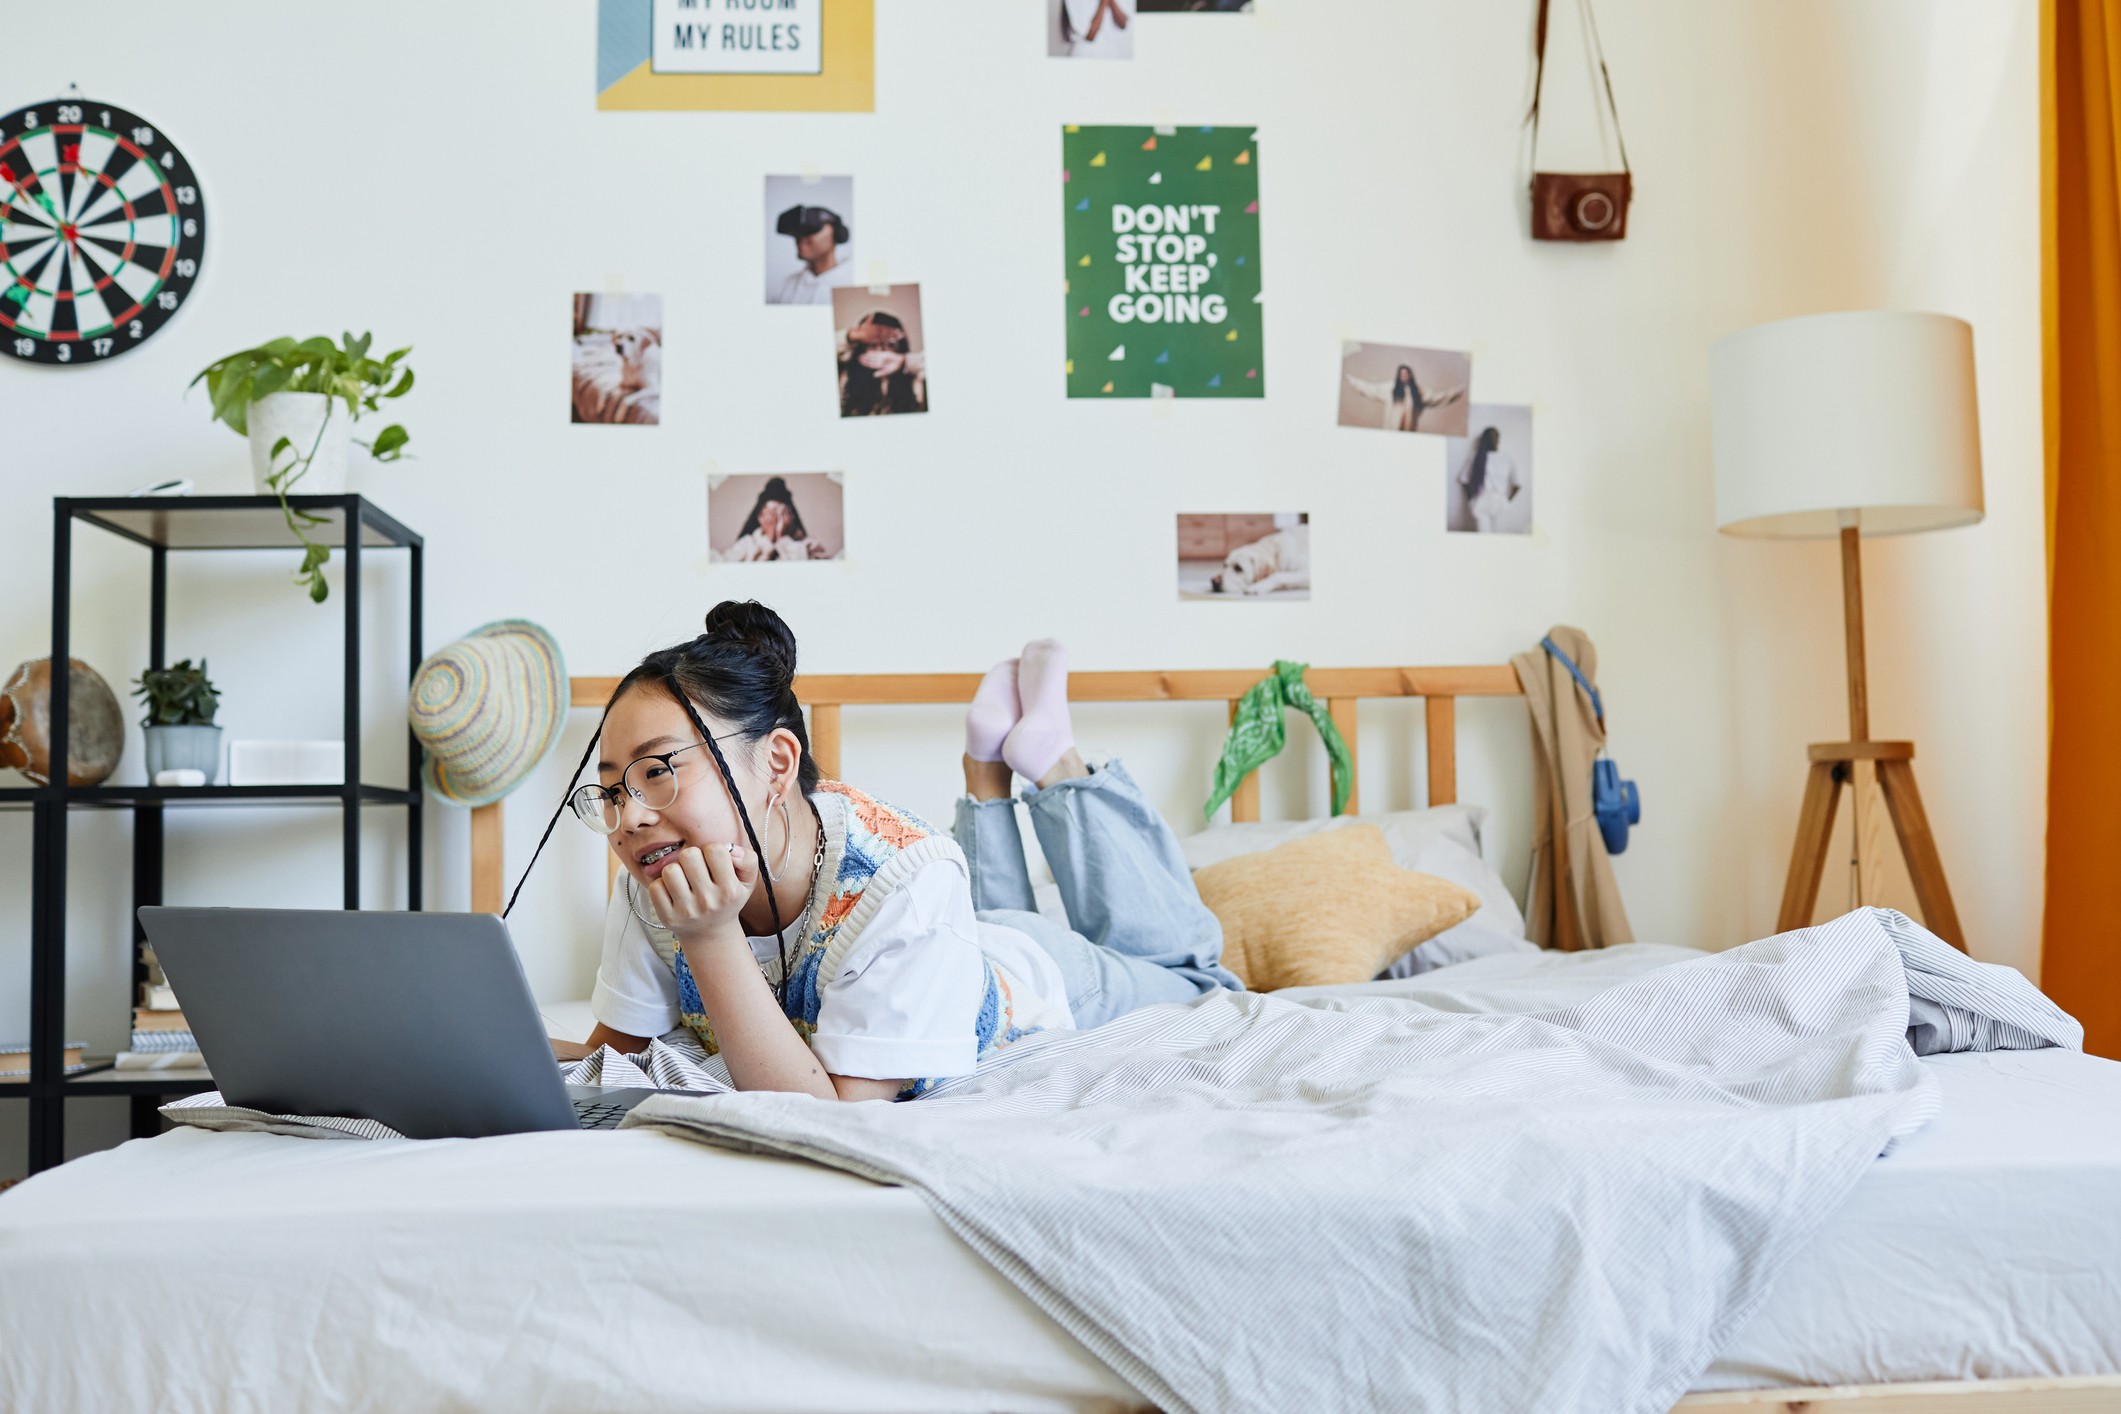 Portrait of teenage Asian girl using laptop on bed in cozy room interior. Designing a Kid’s Room that Lasts